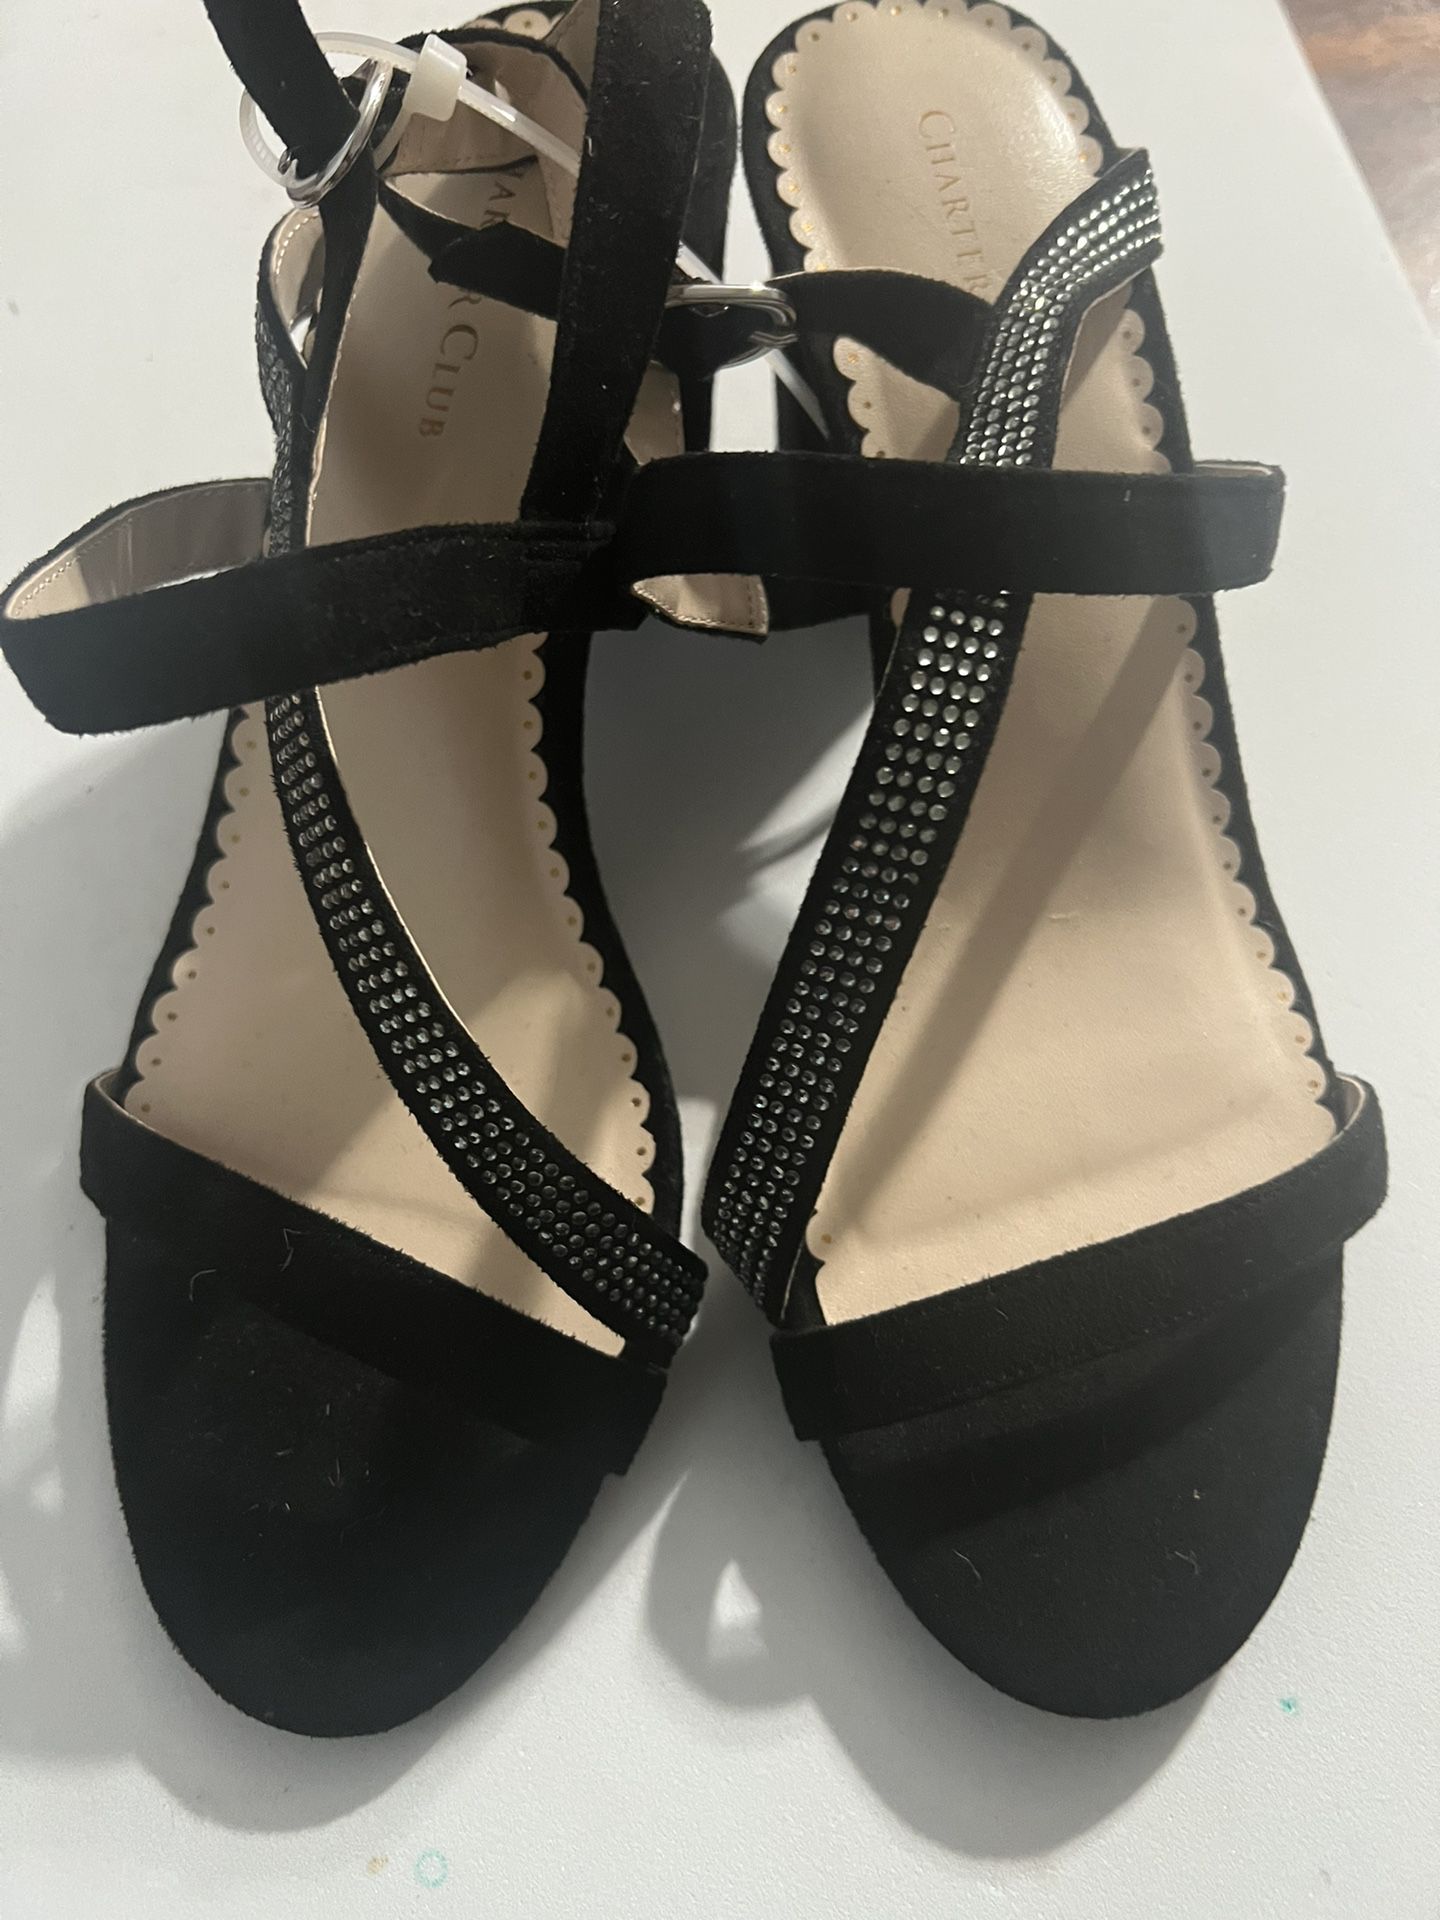 new without box Charter club heels size 8